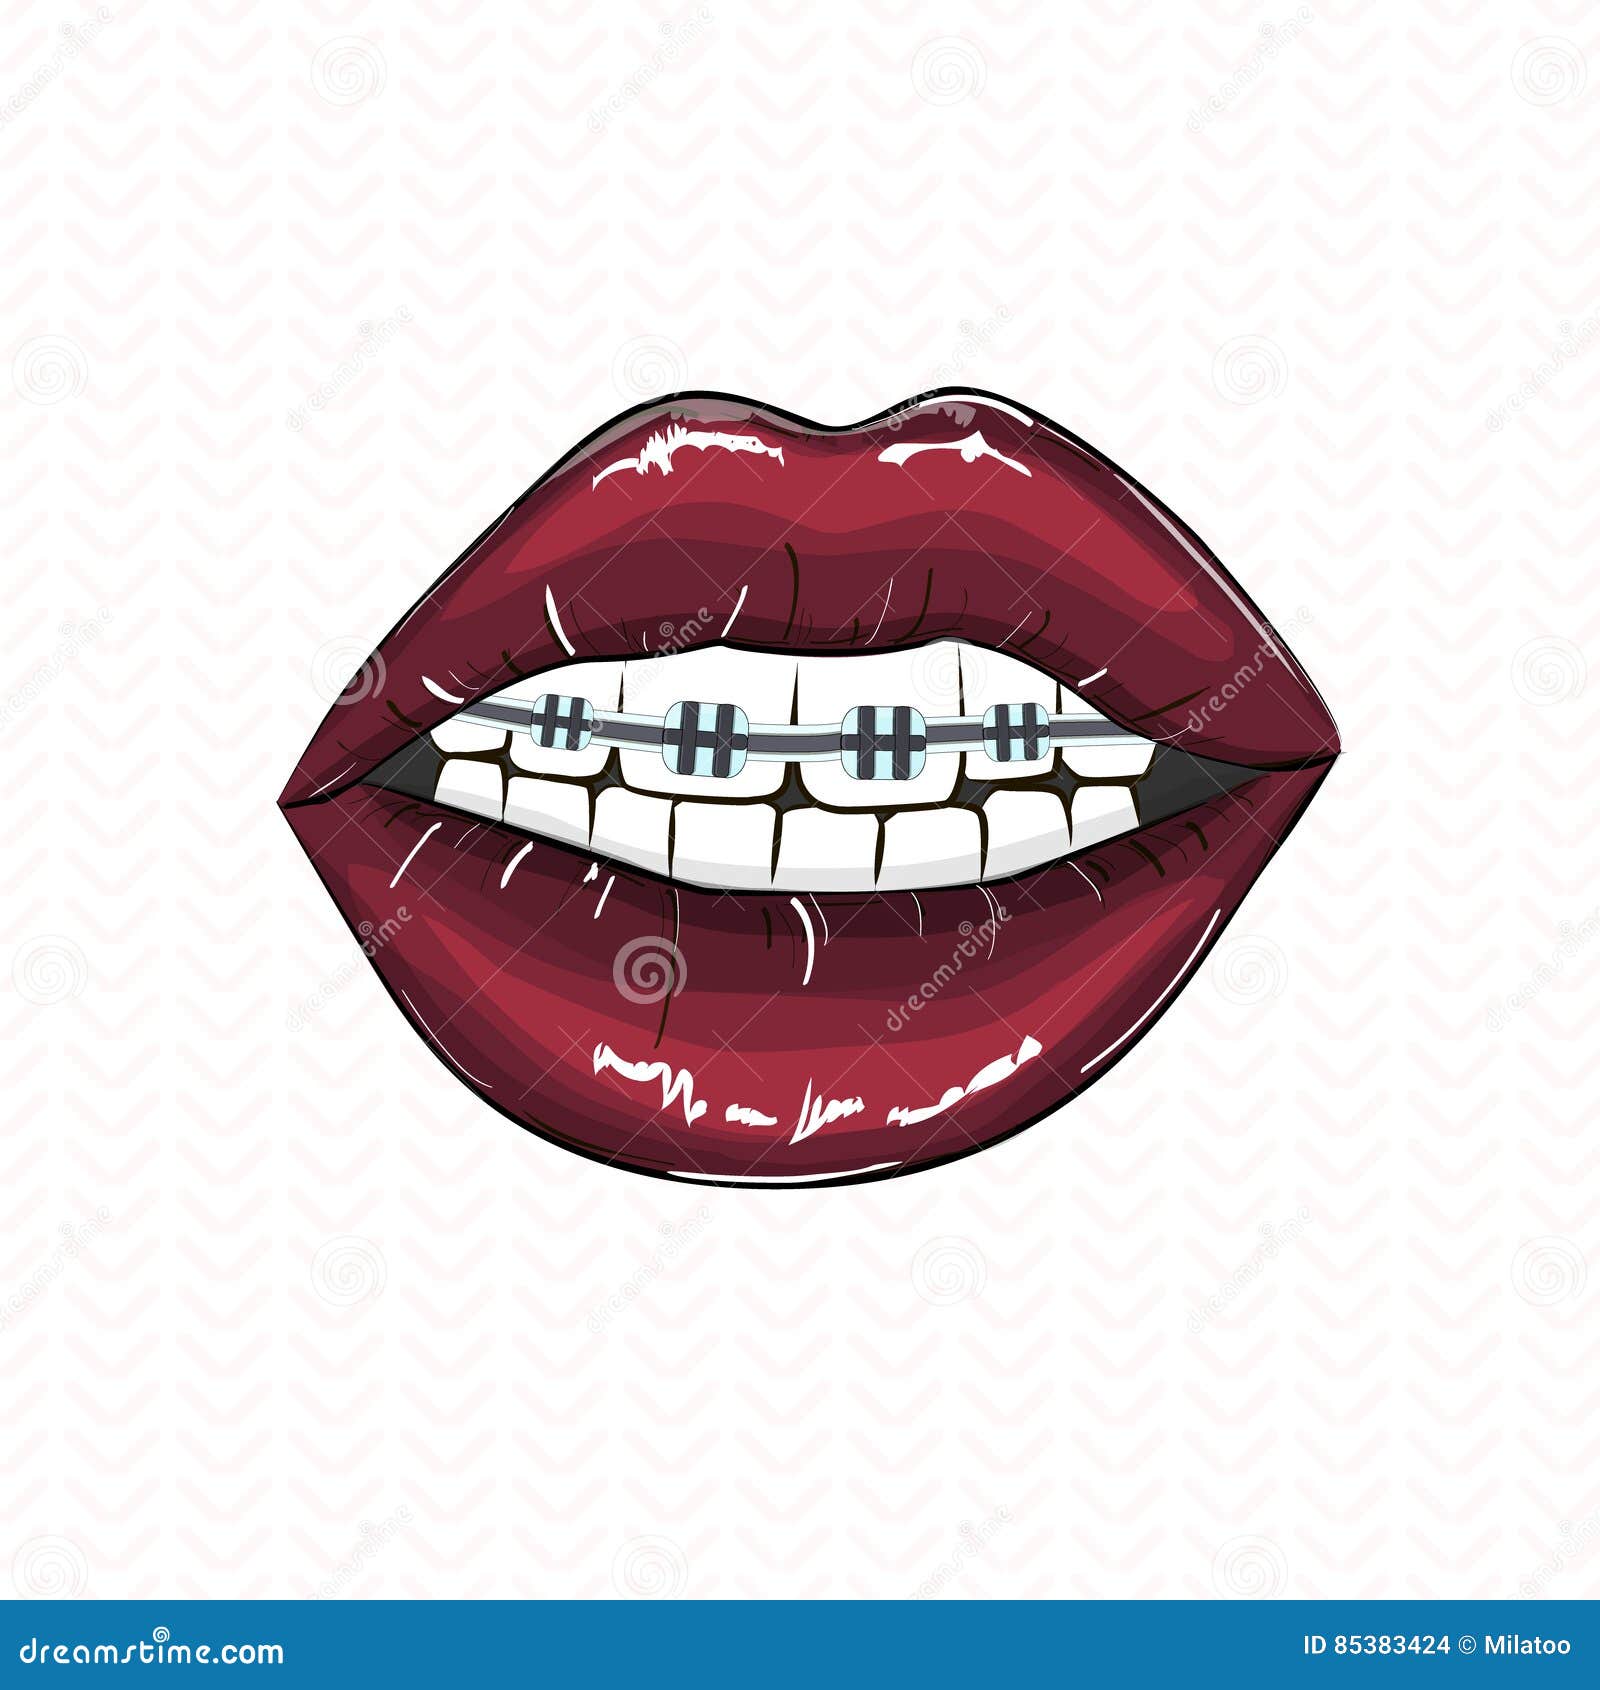 red lips braces . erotic playful hot clipart. modern smile fashion . pop art open mouth with teeth an